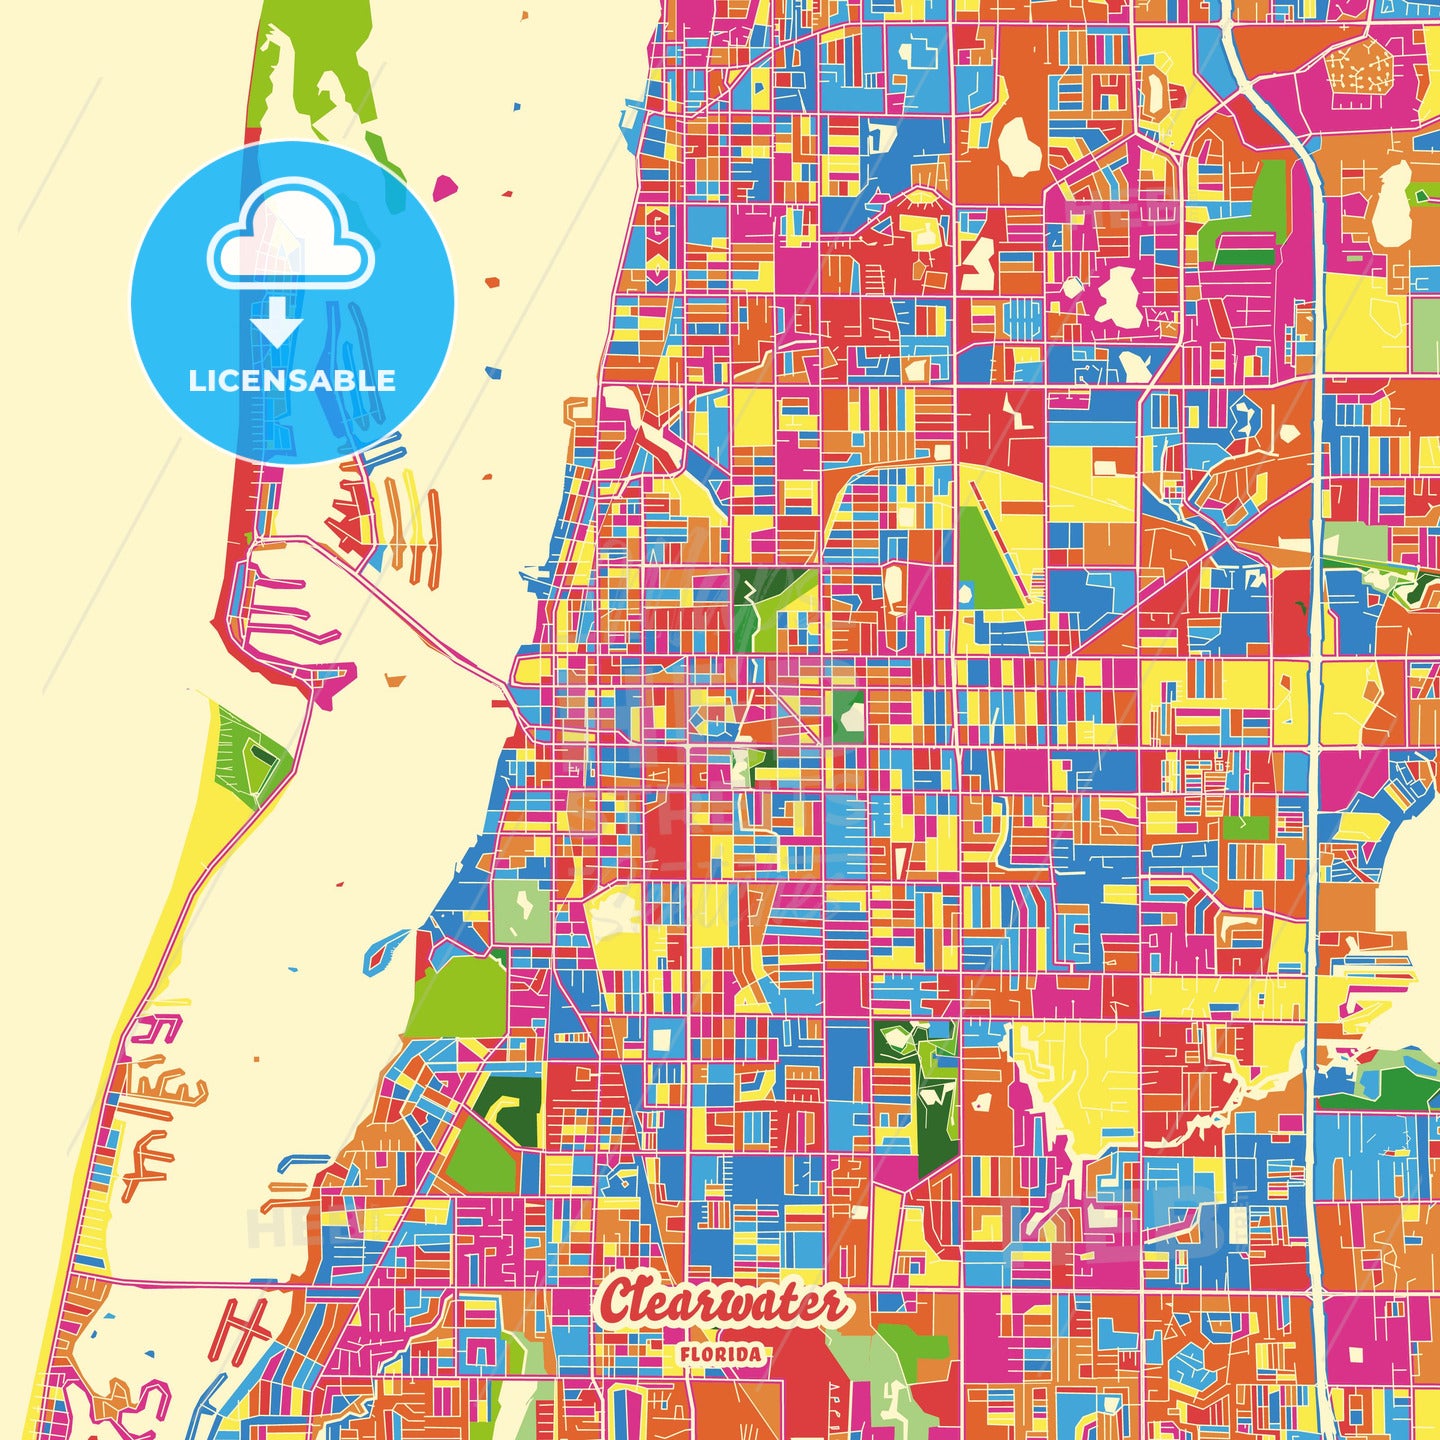 Clearwater, United States Crazy Colorful Street Map Poster Template - HEBSTREITS Sketches